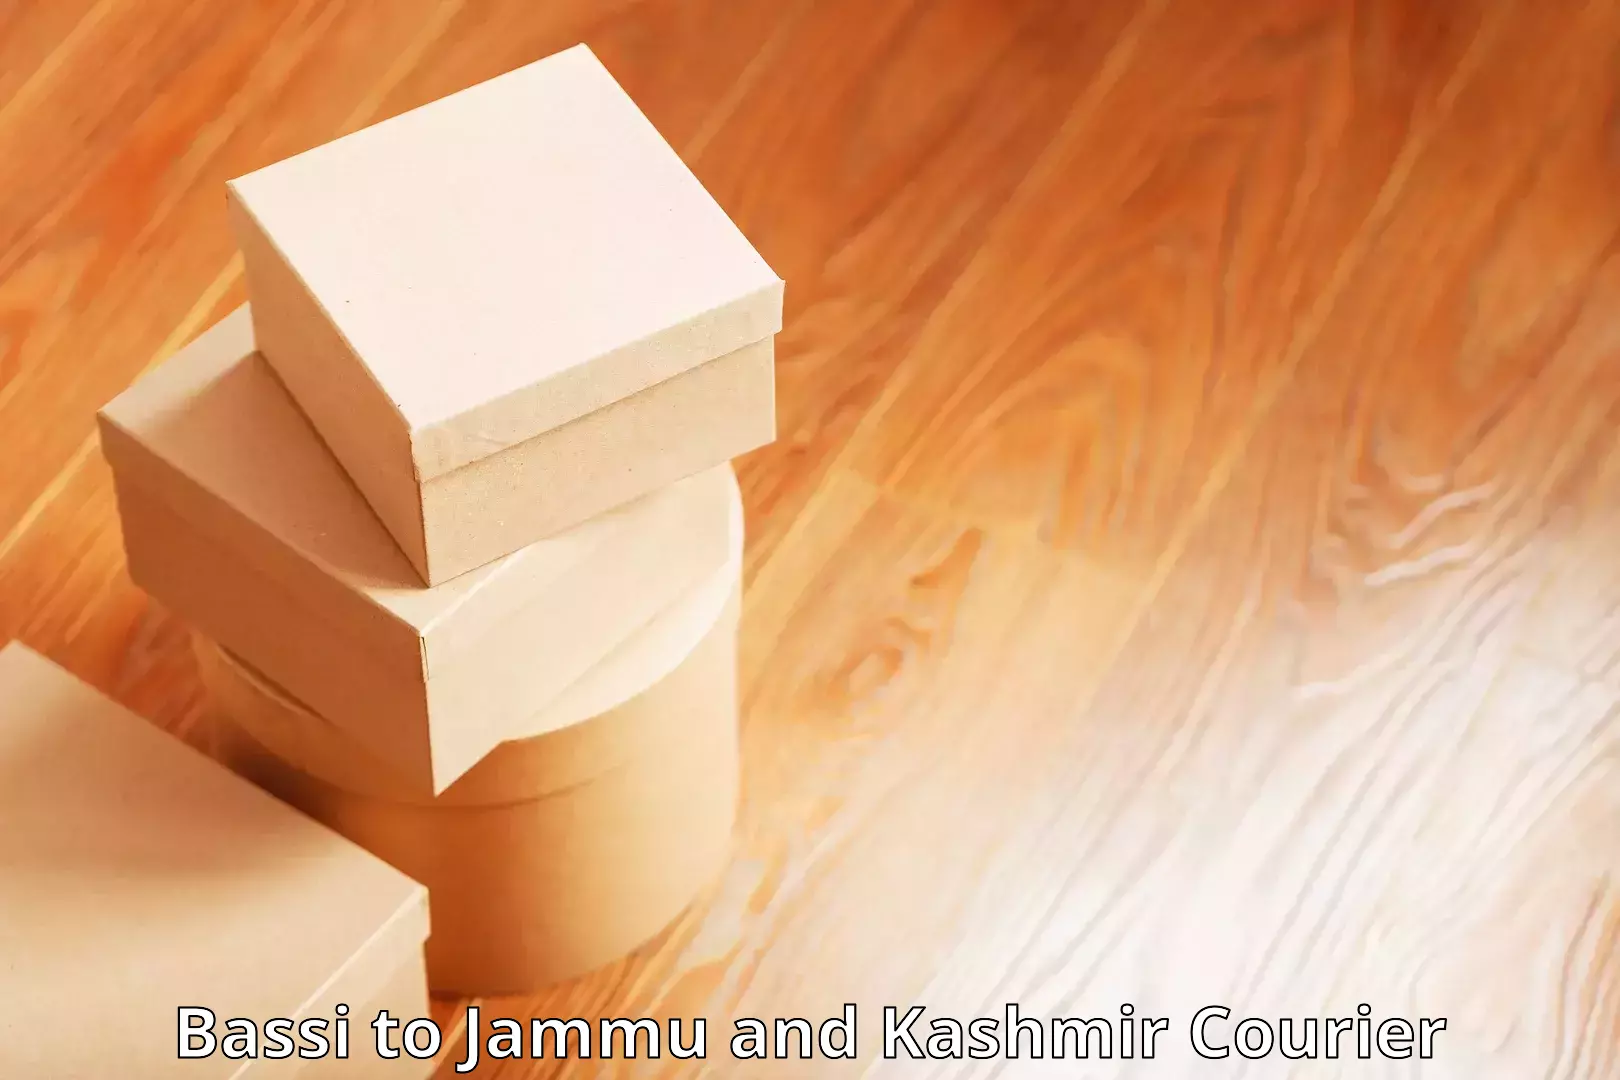 Parcel handling and care Bassi to Jammu and Kashmir